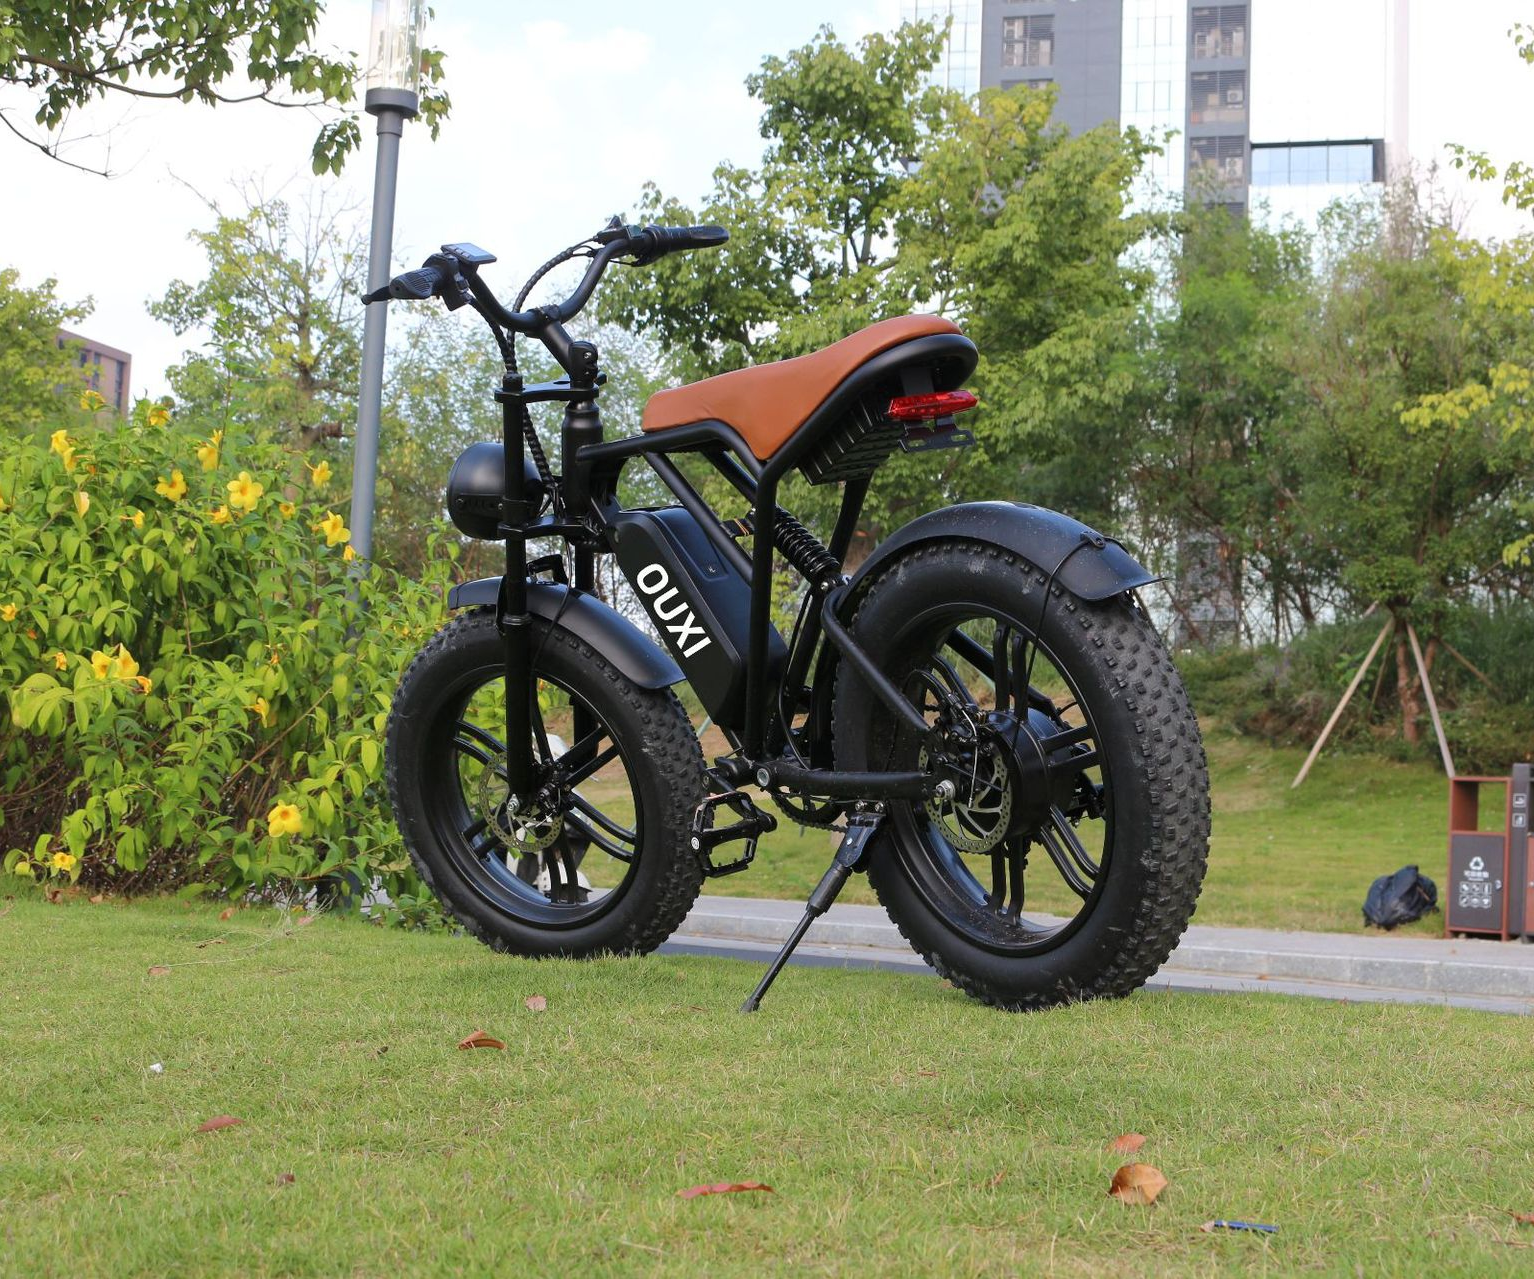 Adopt an Environmentally-Friendly Way of Travelling with OUXI’s Fat Tire Bicycle.